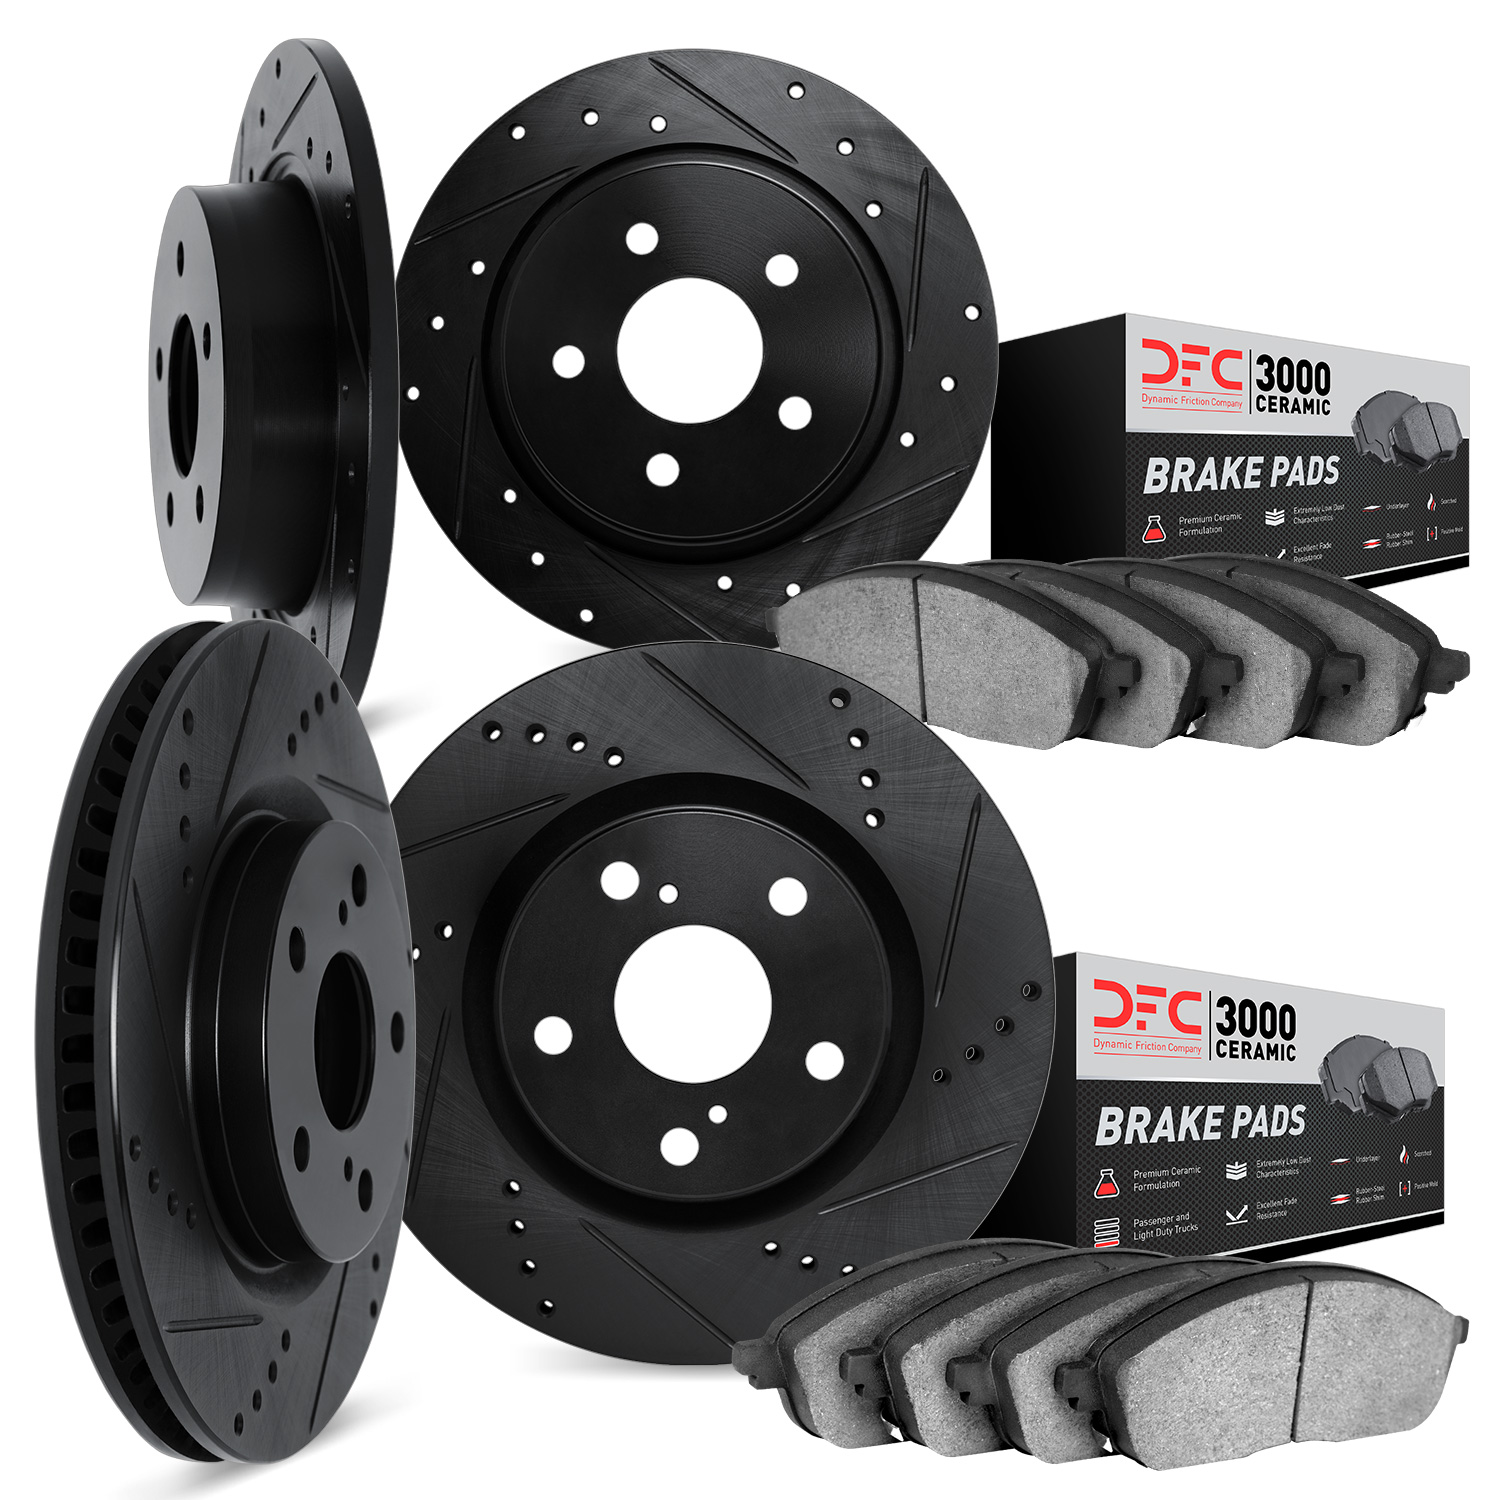 8304-63009 Drilled/Slotted Brake Rotors with 3000-Series Ceramic Brake Pads Kit [Black], 1970-1972 Mercedes-Benz, Position: Fron